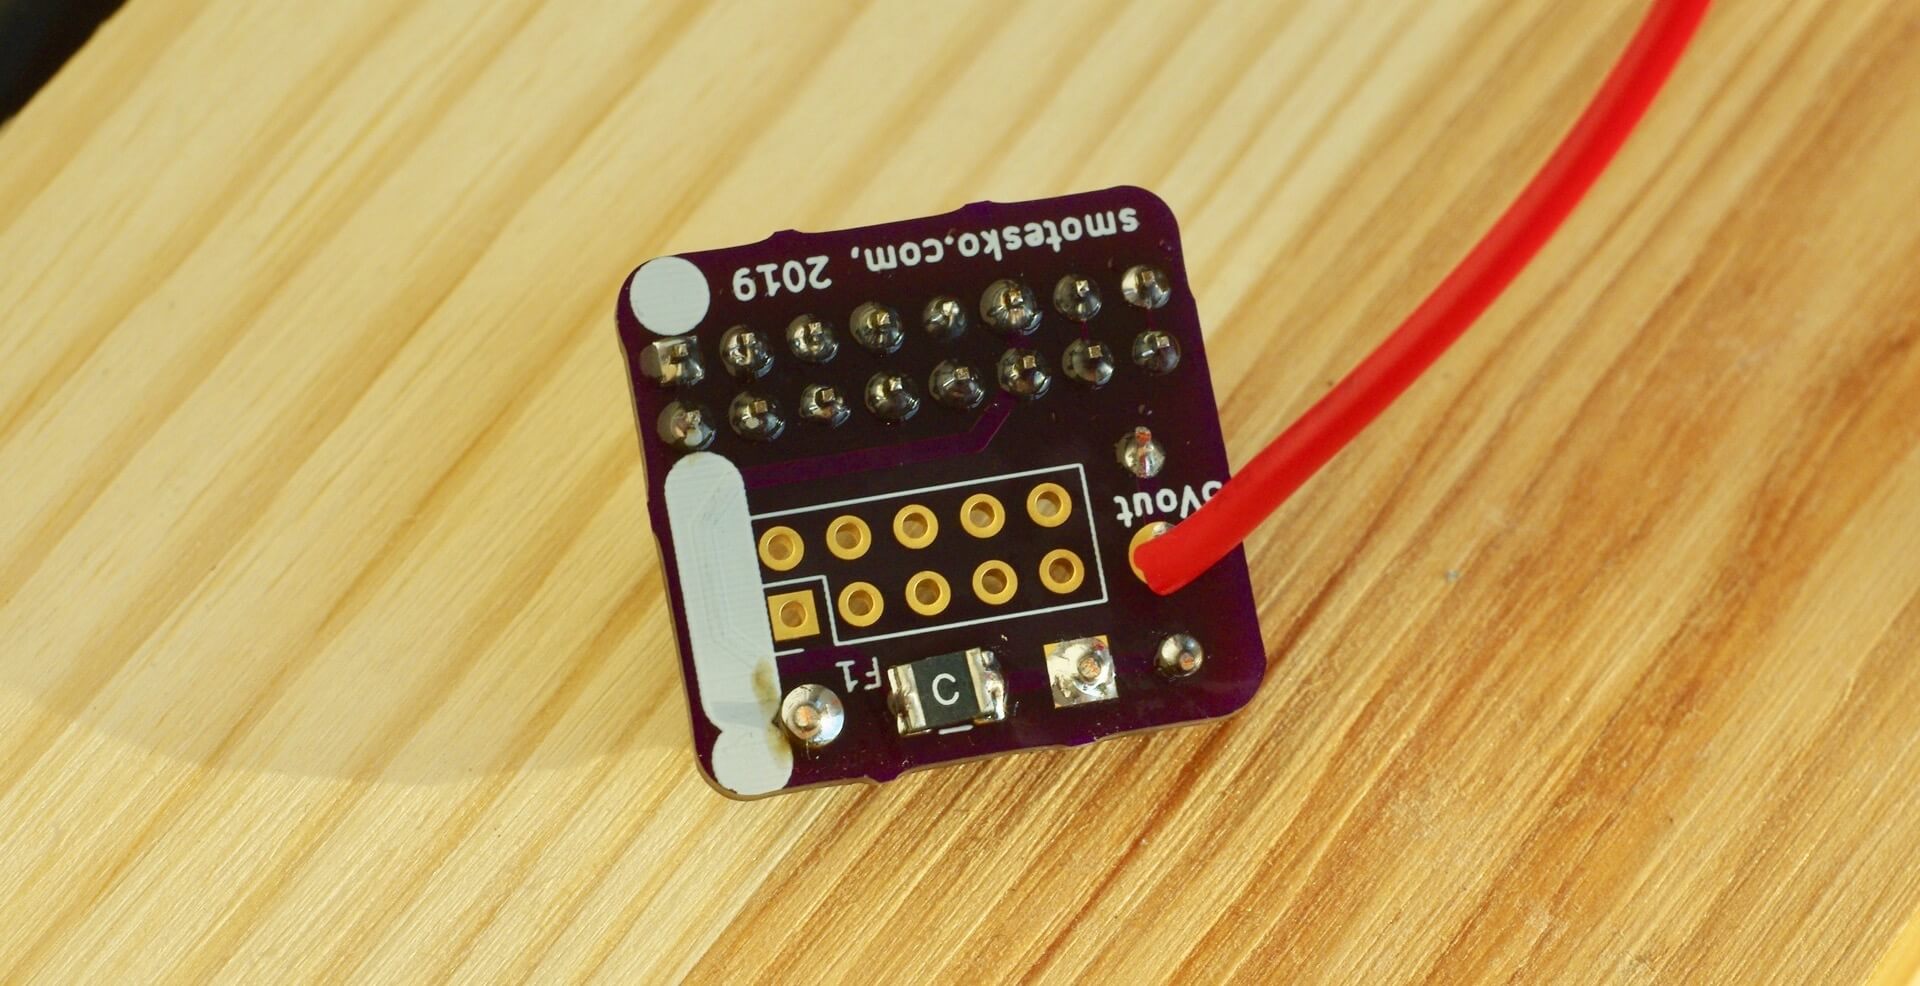 +5V adapter with a wire attached